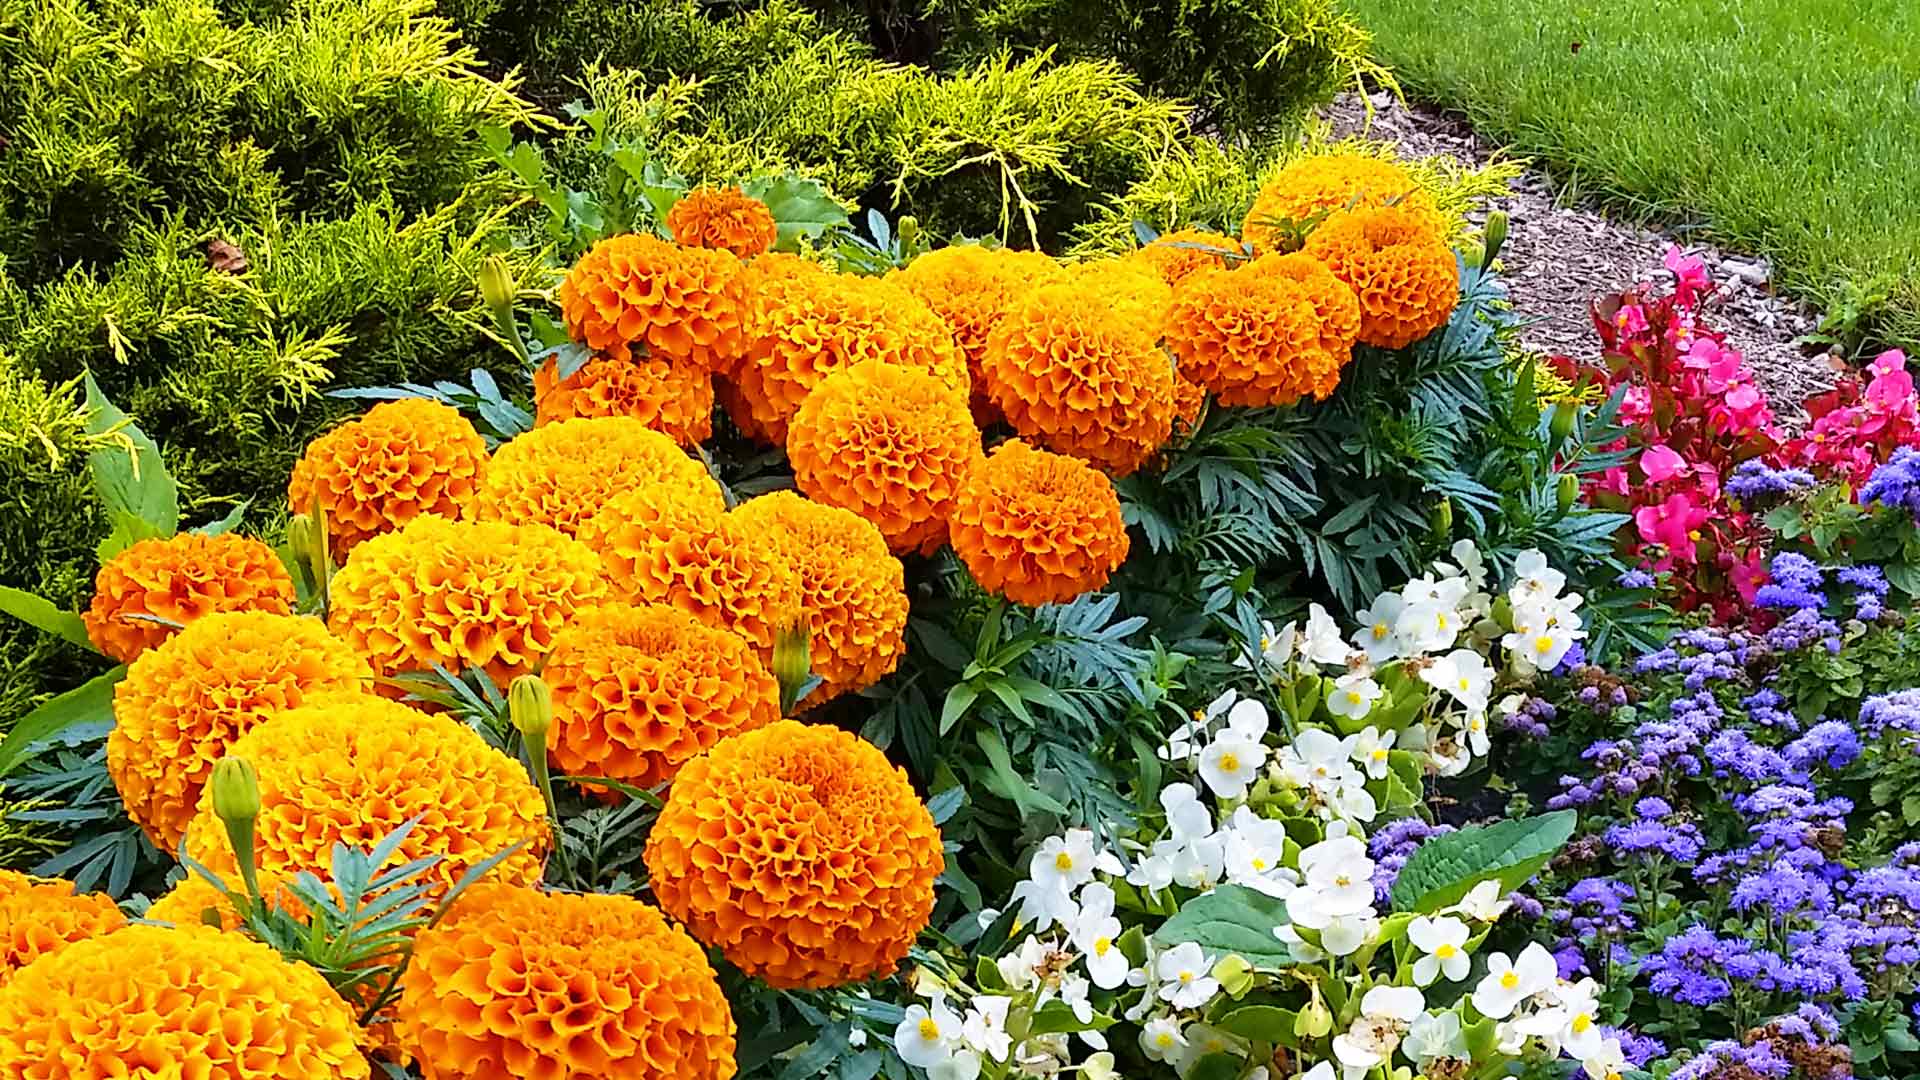 A vibrant flower bed with orange marigolds, white and blue blooms, pink flowers, and lush green shrubs, showcasing a variety of colors and textures.